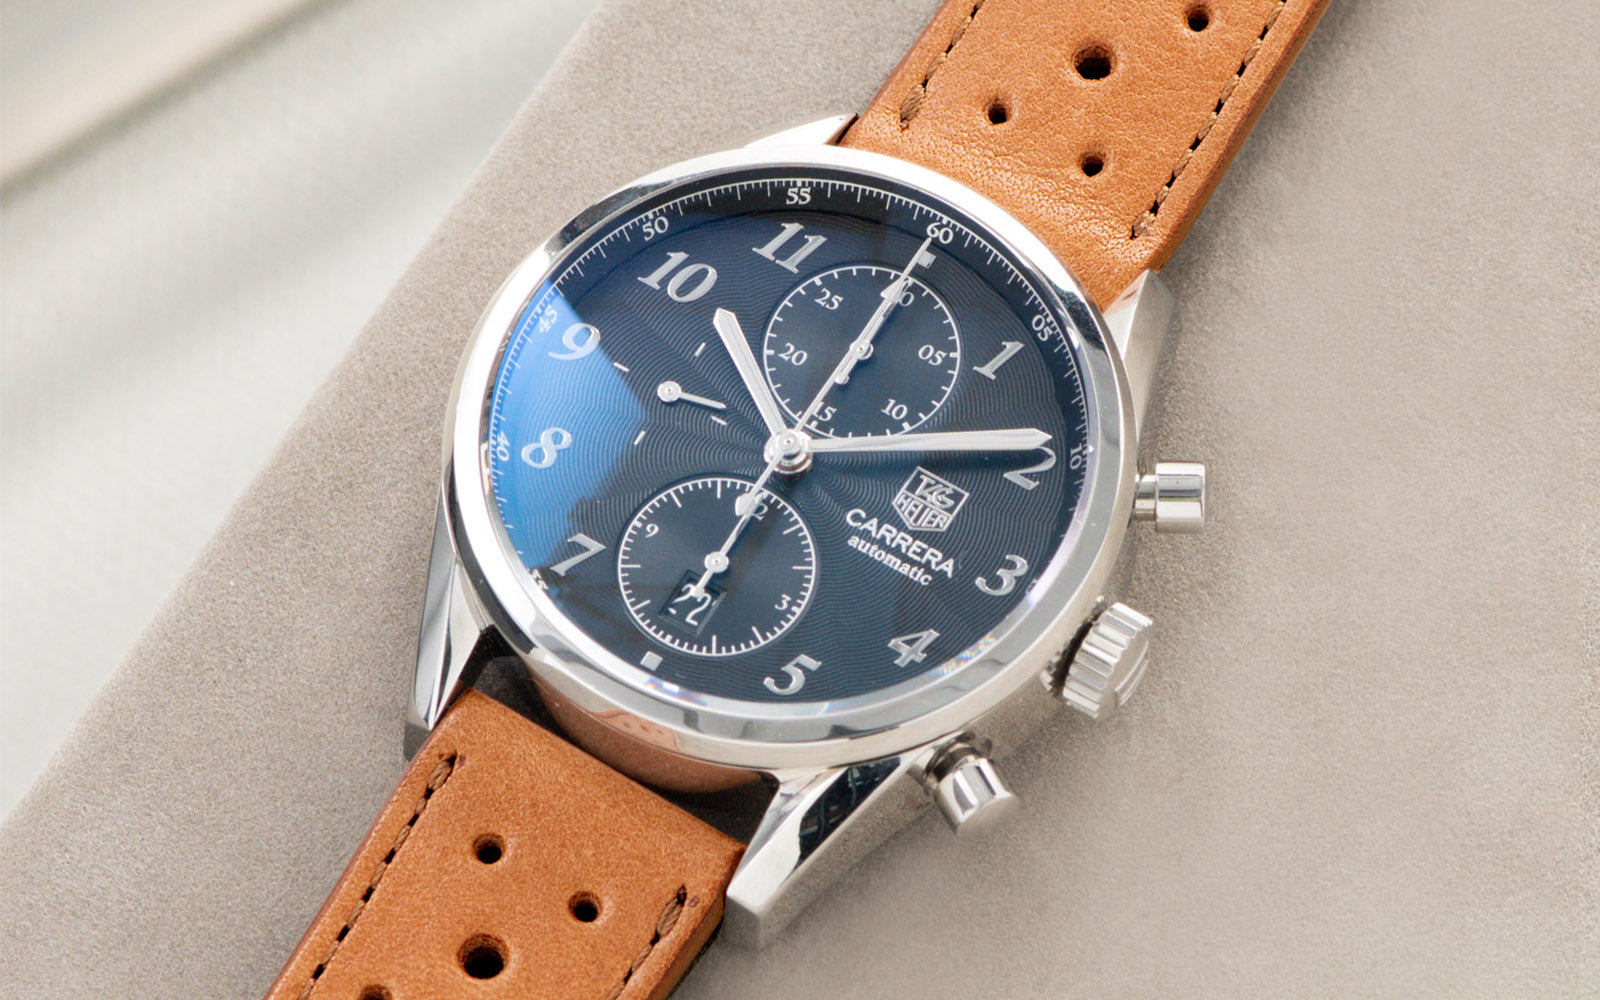 Bulang and Sons_Strap Guide_Tag Heuer Calibre 16 Carrera_Caramel Brown Leather Watch Strap Banner